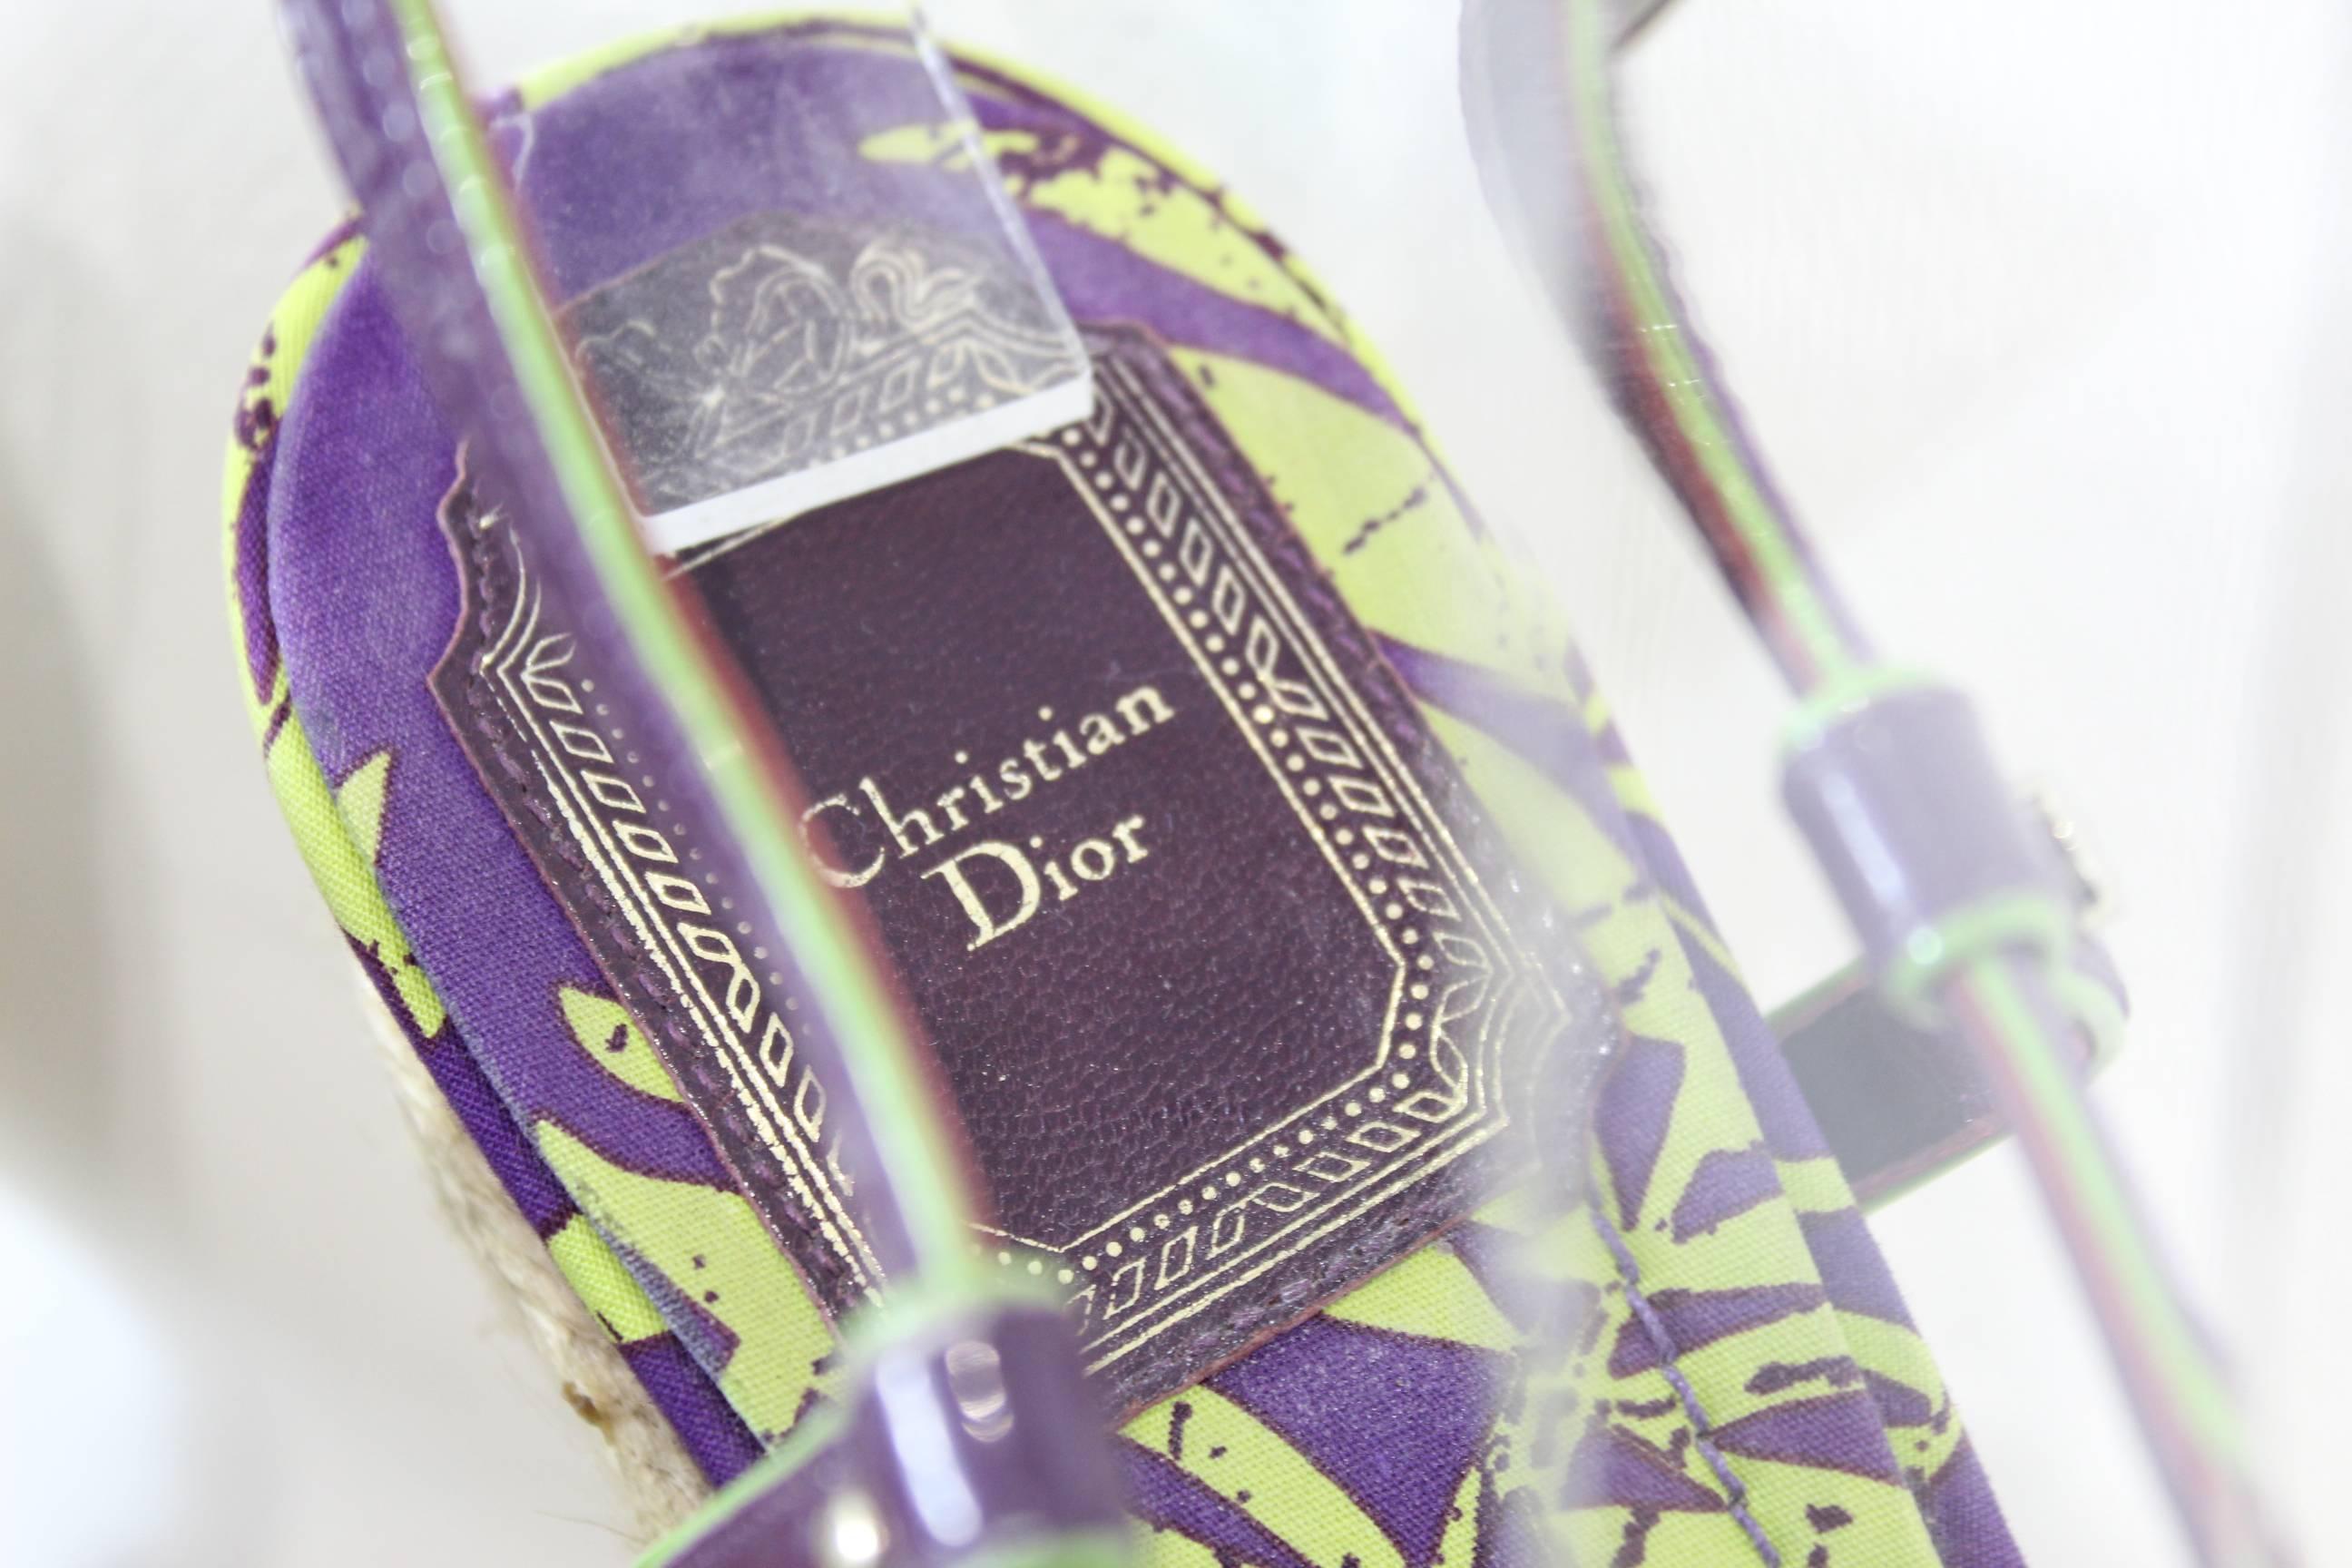 Really ncie Christian Dior sandals in cord and patented purple leather.

Size europen 37 so 5,5 US

They have been woorn but they remain in good condition.